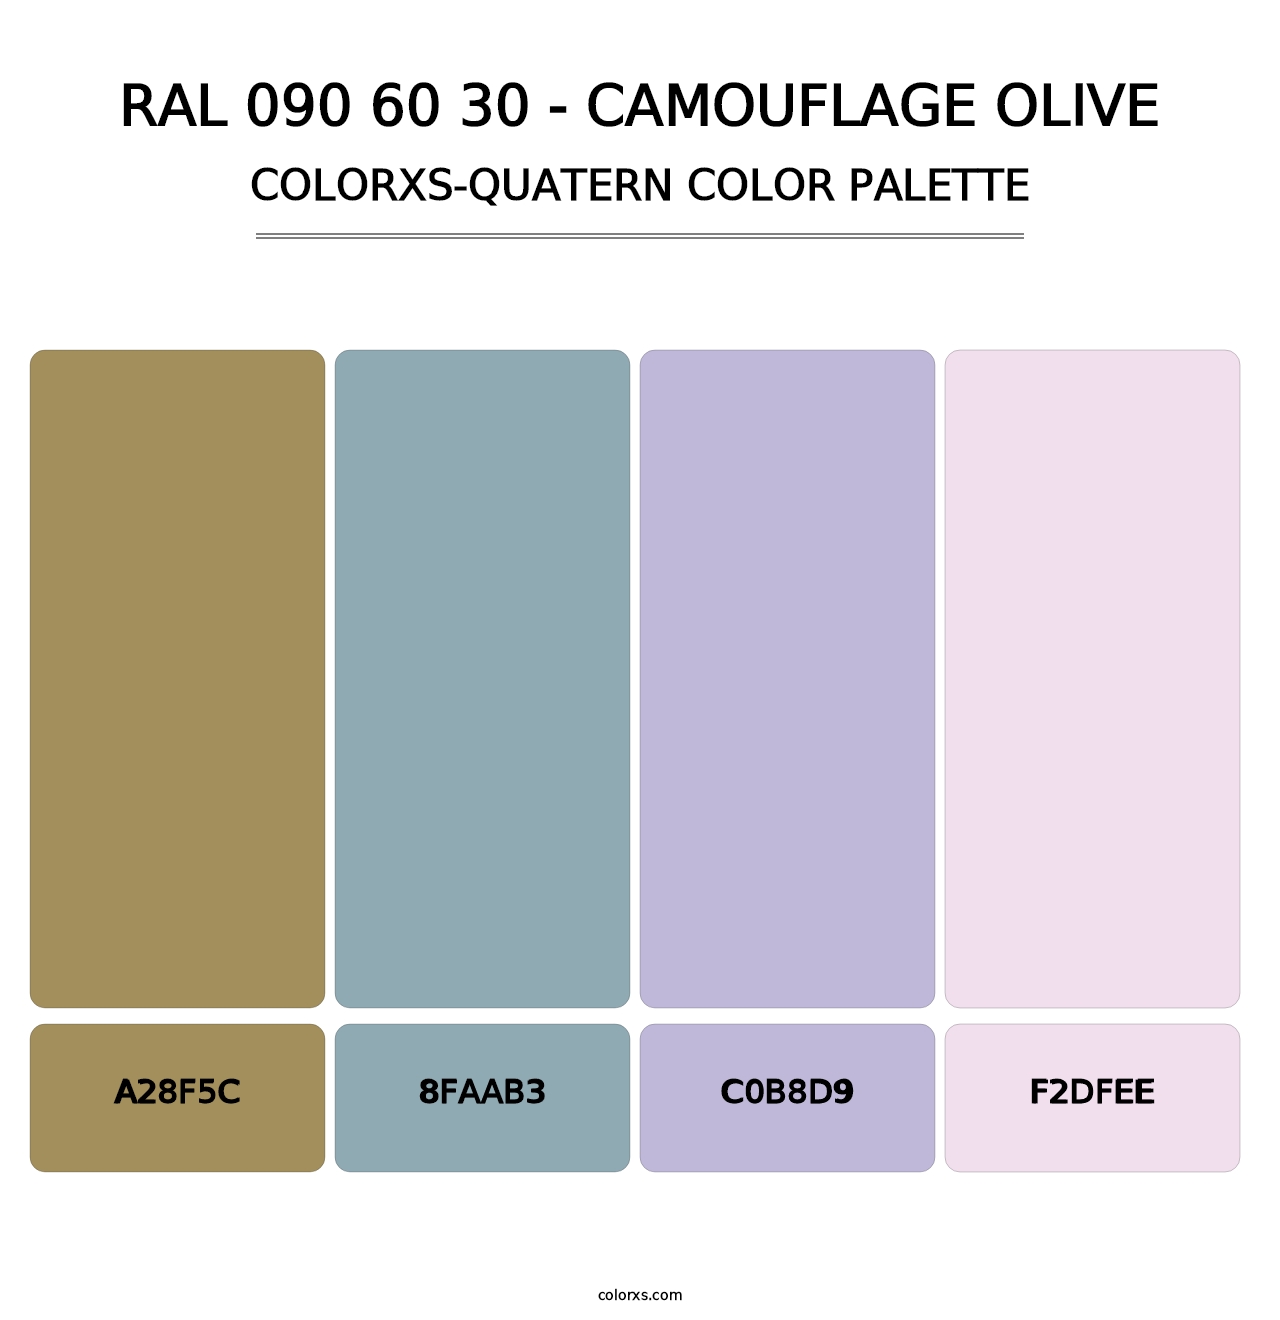 RAL 090 60 30 - Camouflage Olive - Colorxs Quatern Palette